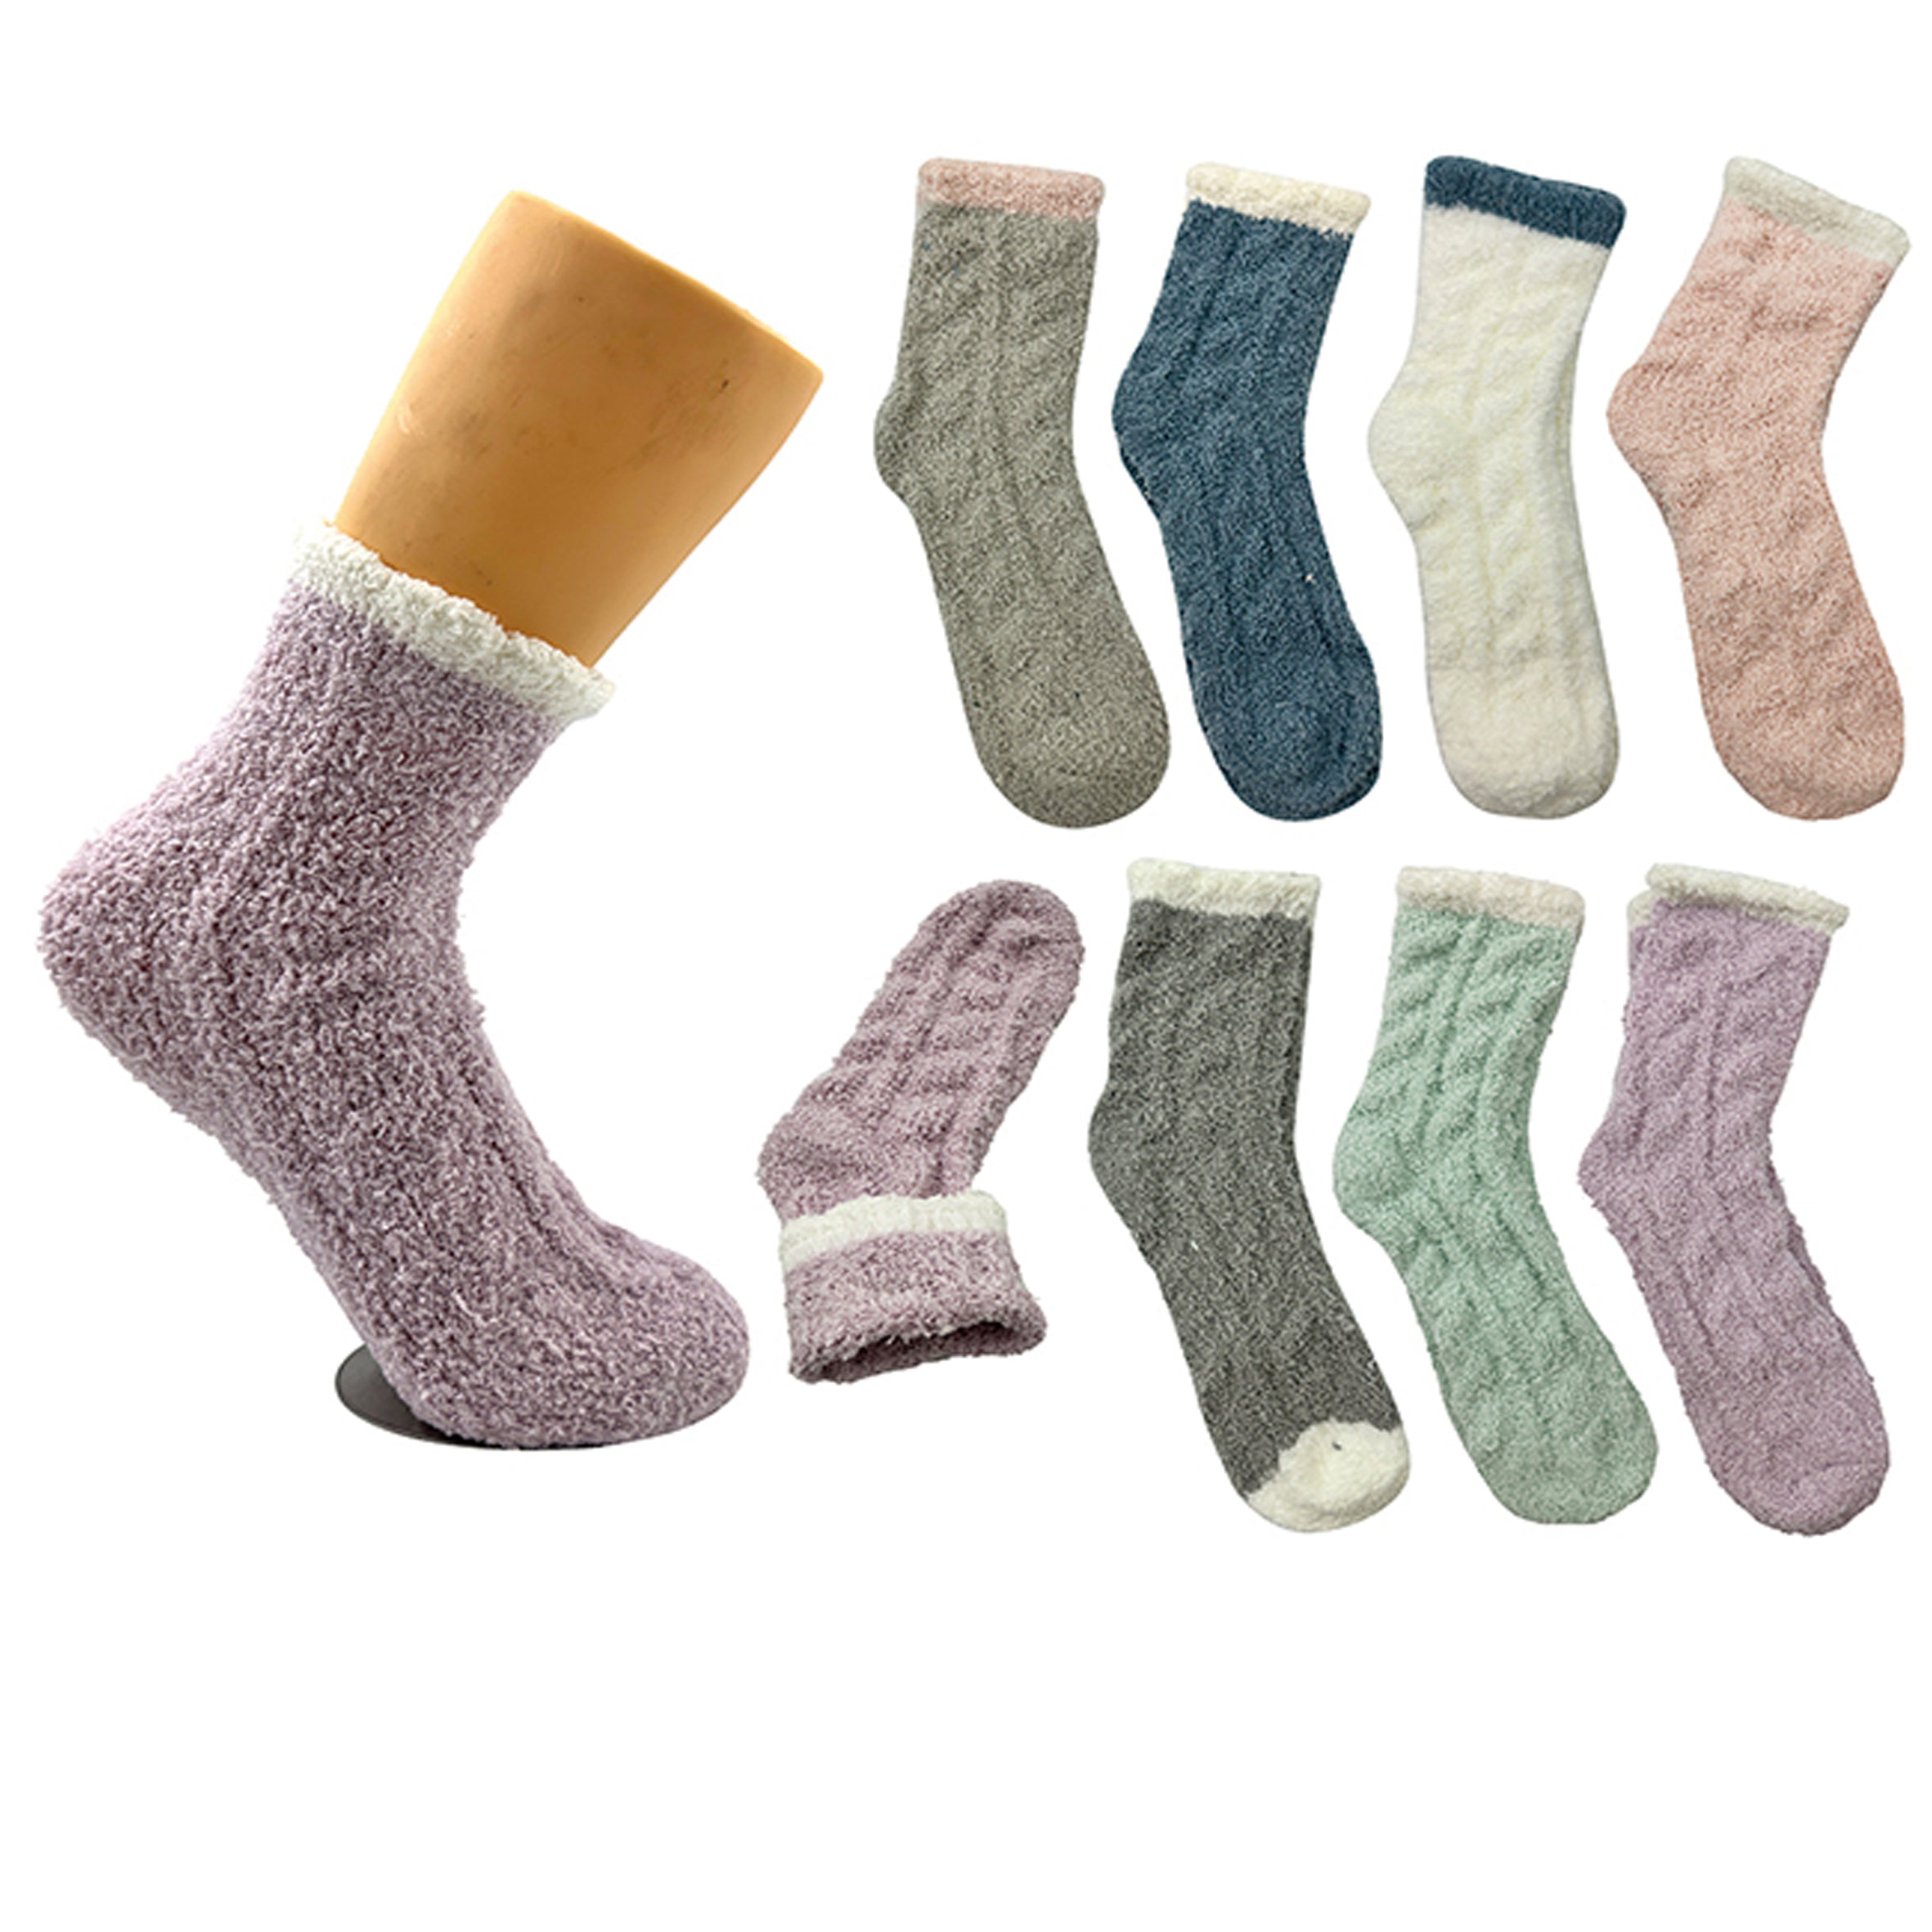 Wholesale Clothing Accessories Twist Terry SOCKS NH206